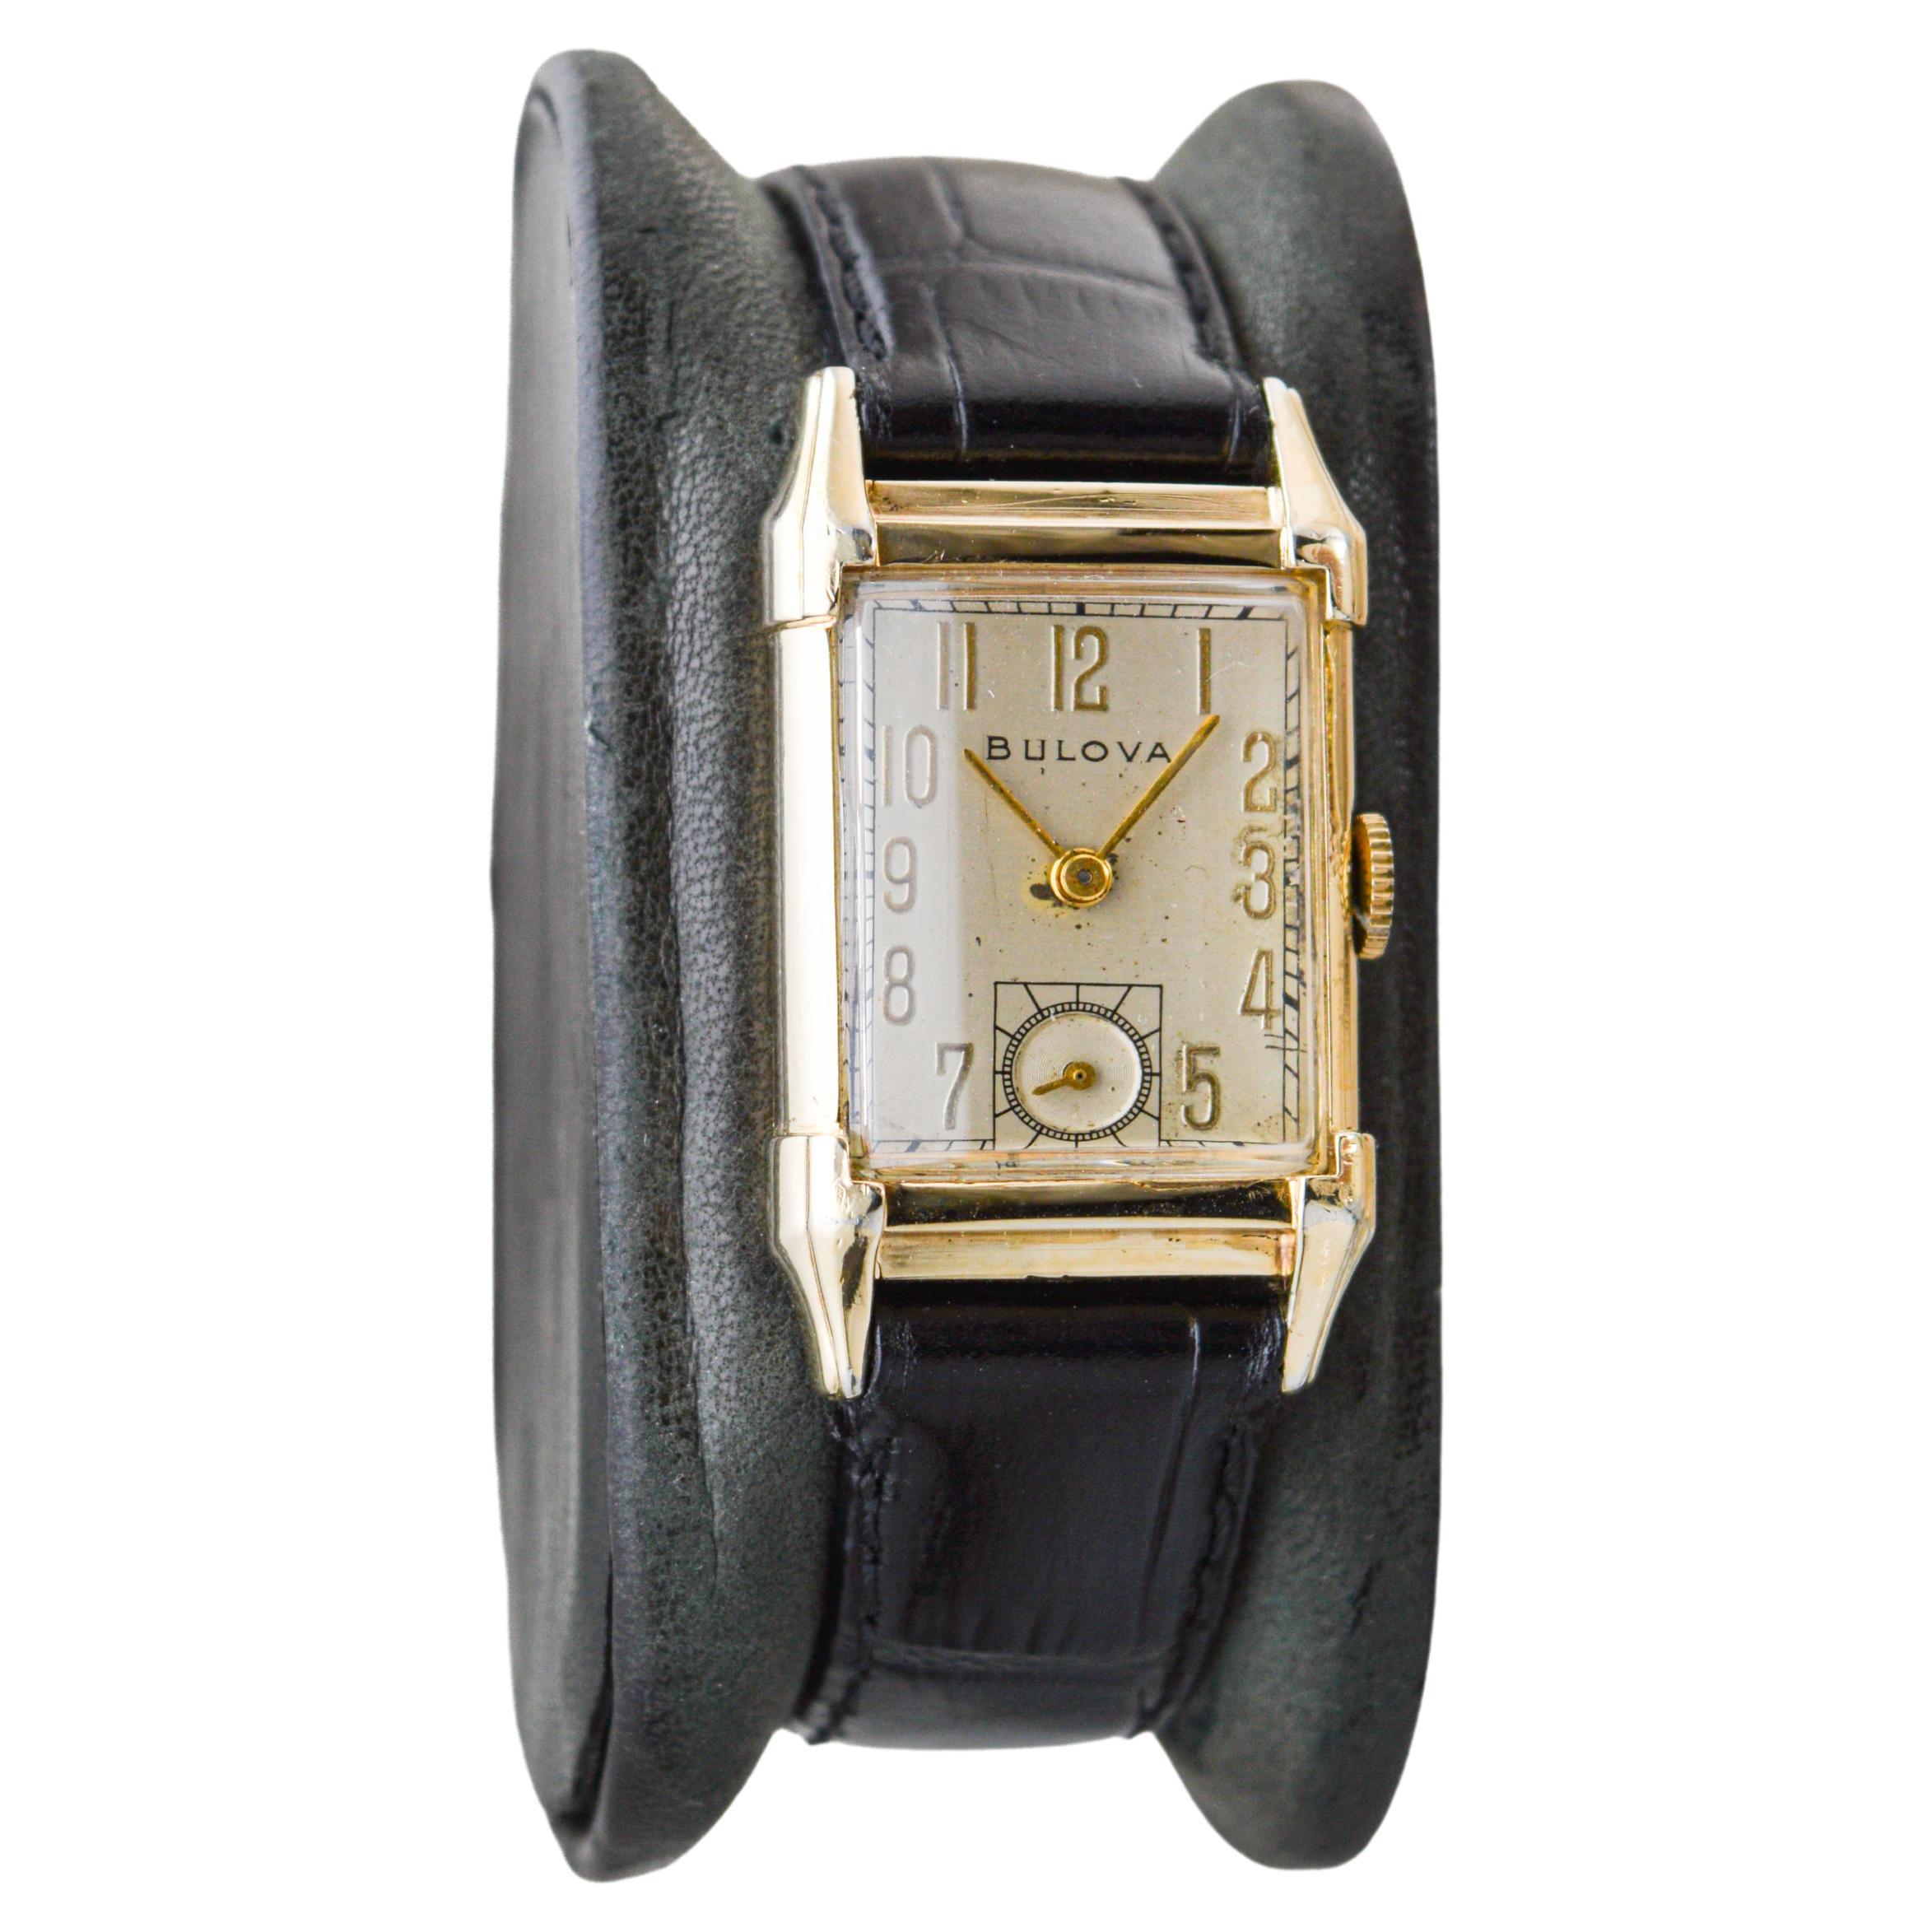 Bulova Yellow Gold Filled Art Deco Tank Watch with Original Dial from 1950's